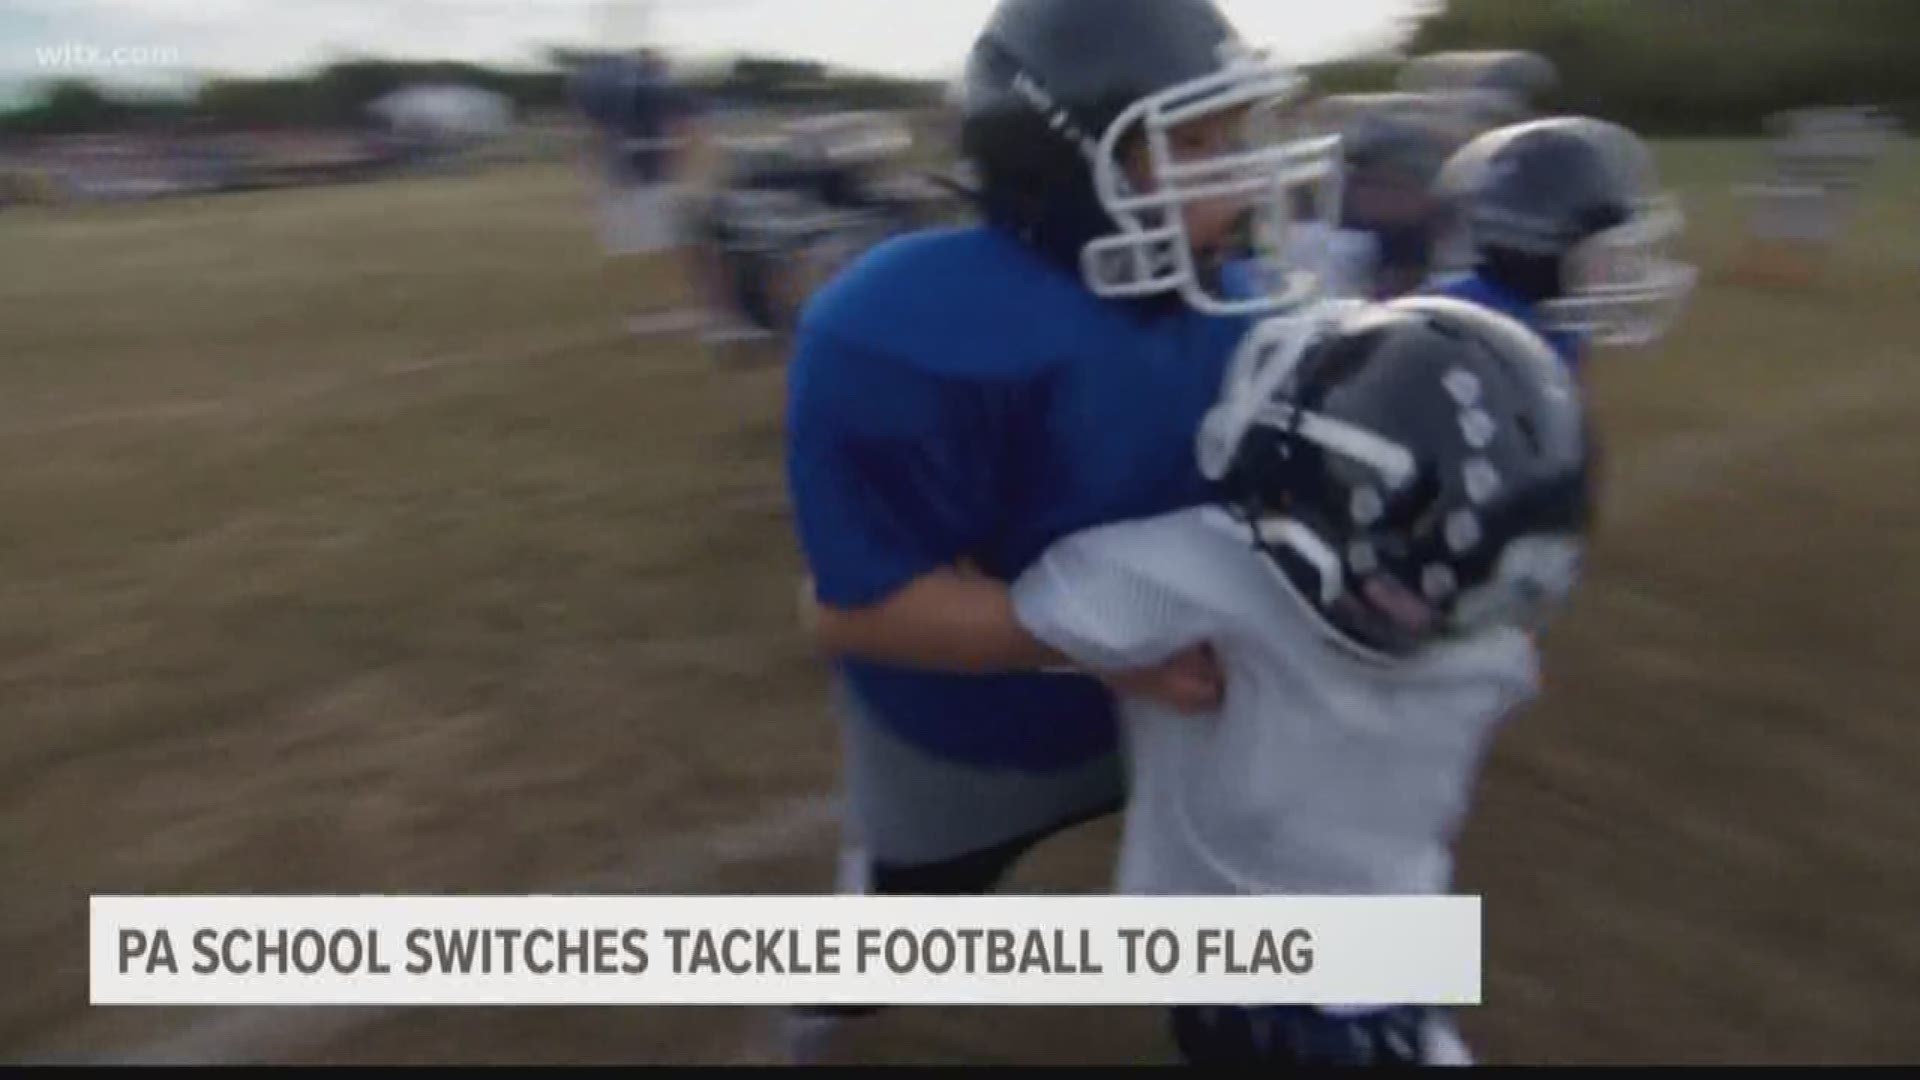 Schools and recreational leagues nationwide are exploring flag football as an option after an increase in concussions.